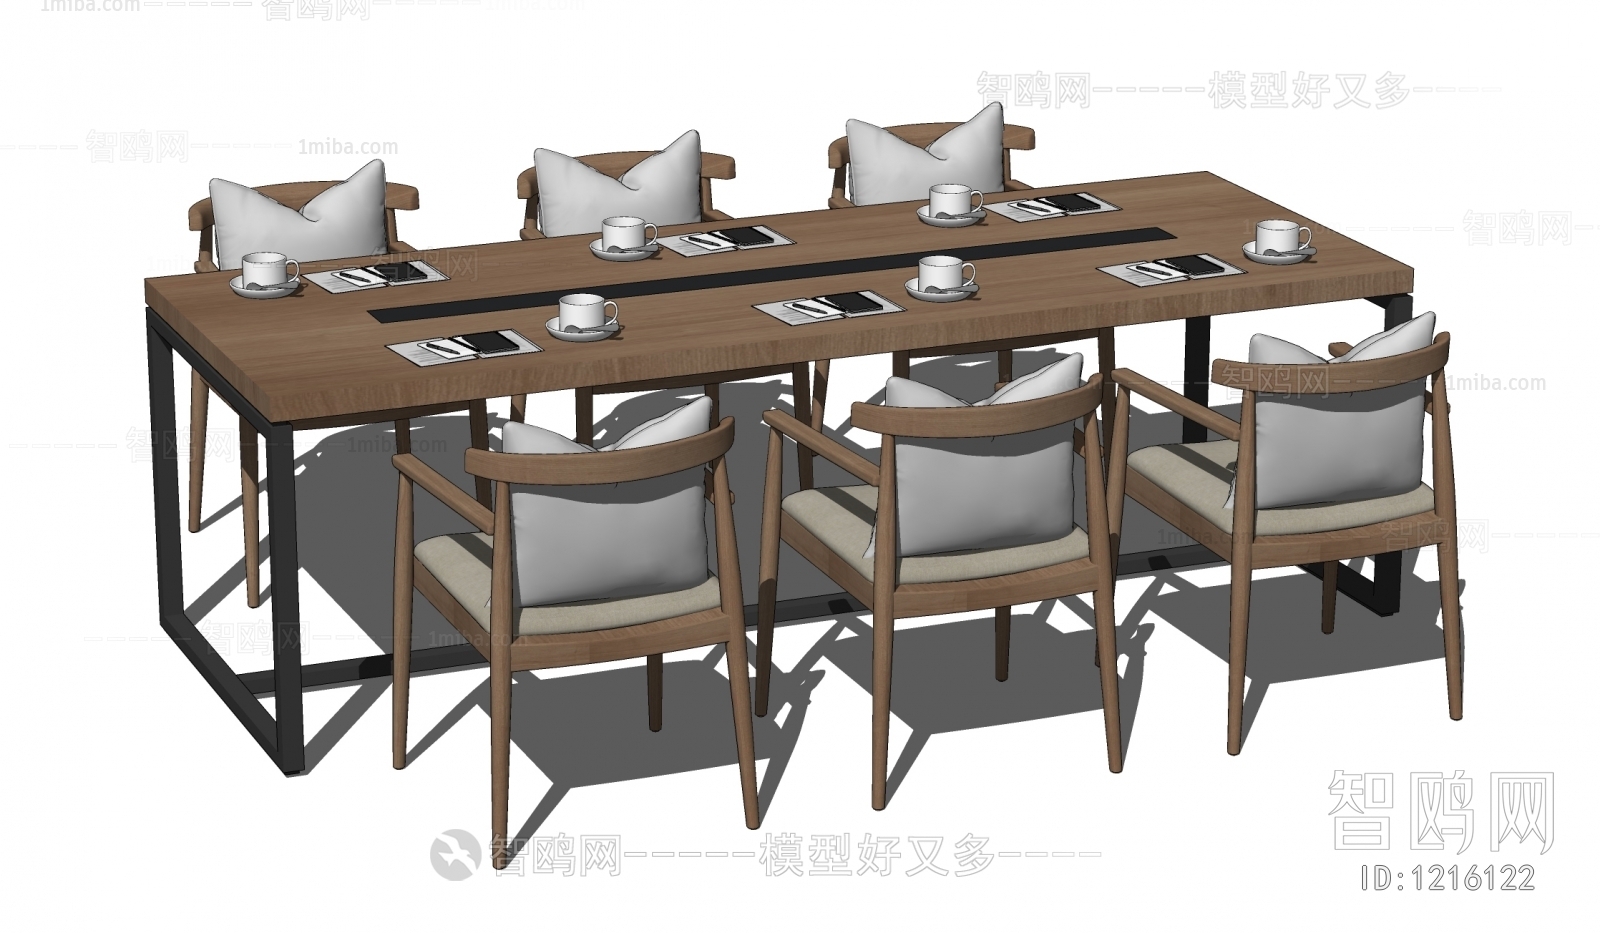 New Chinese Style Conference Table